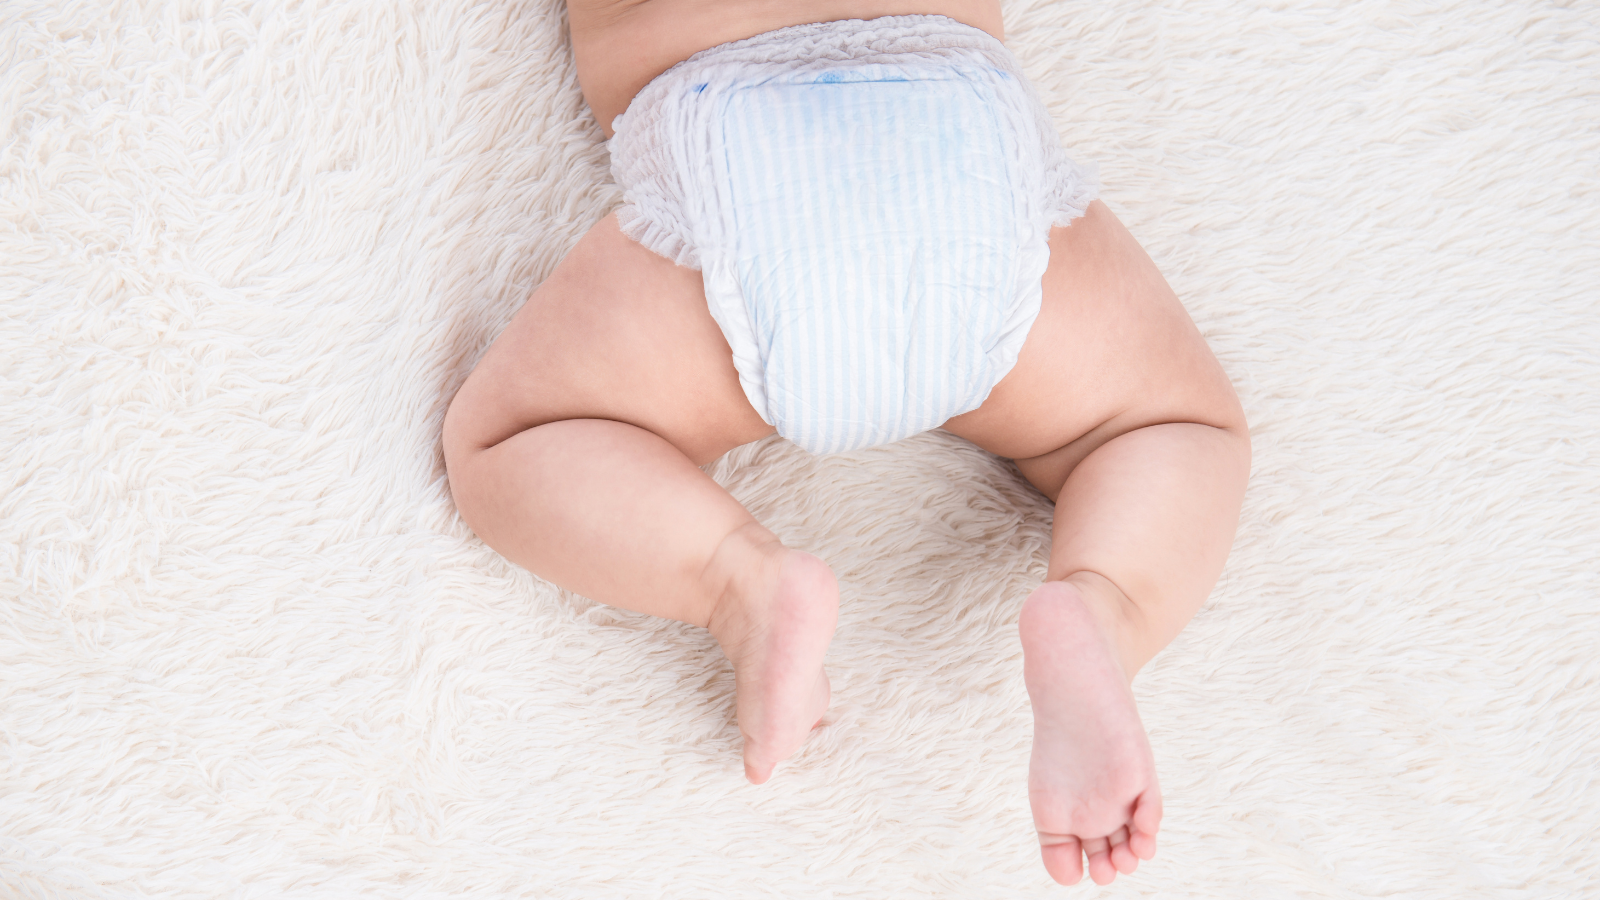 Infant Diapers